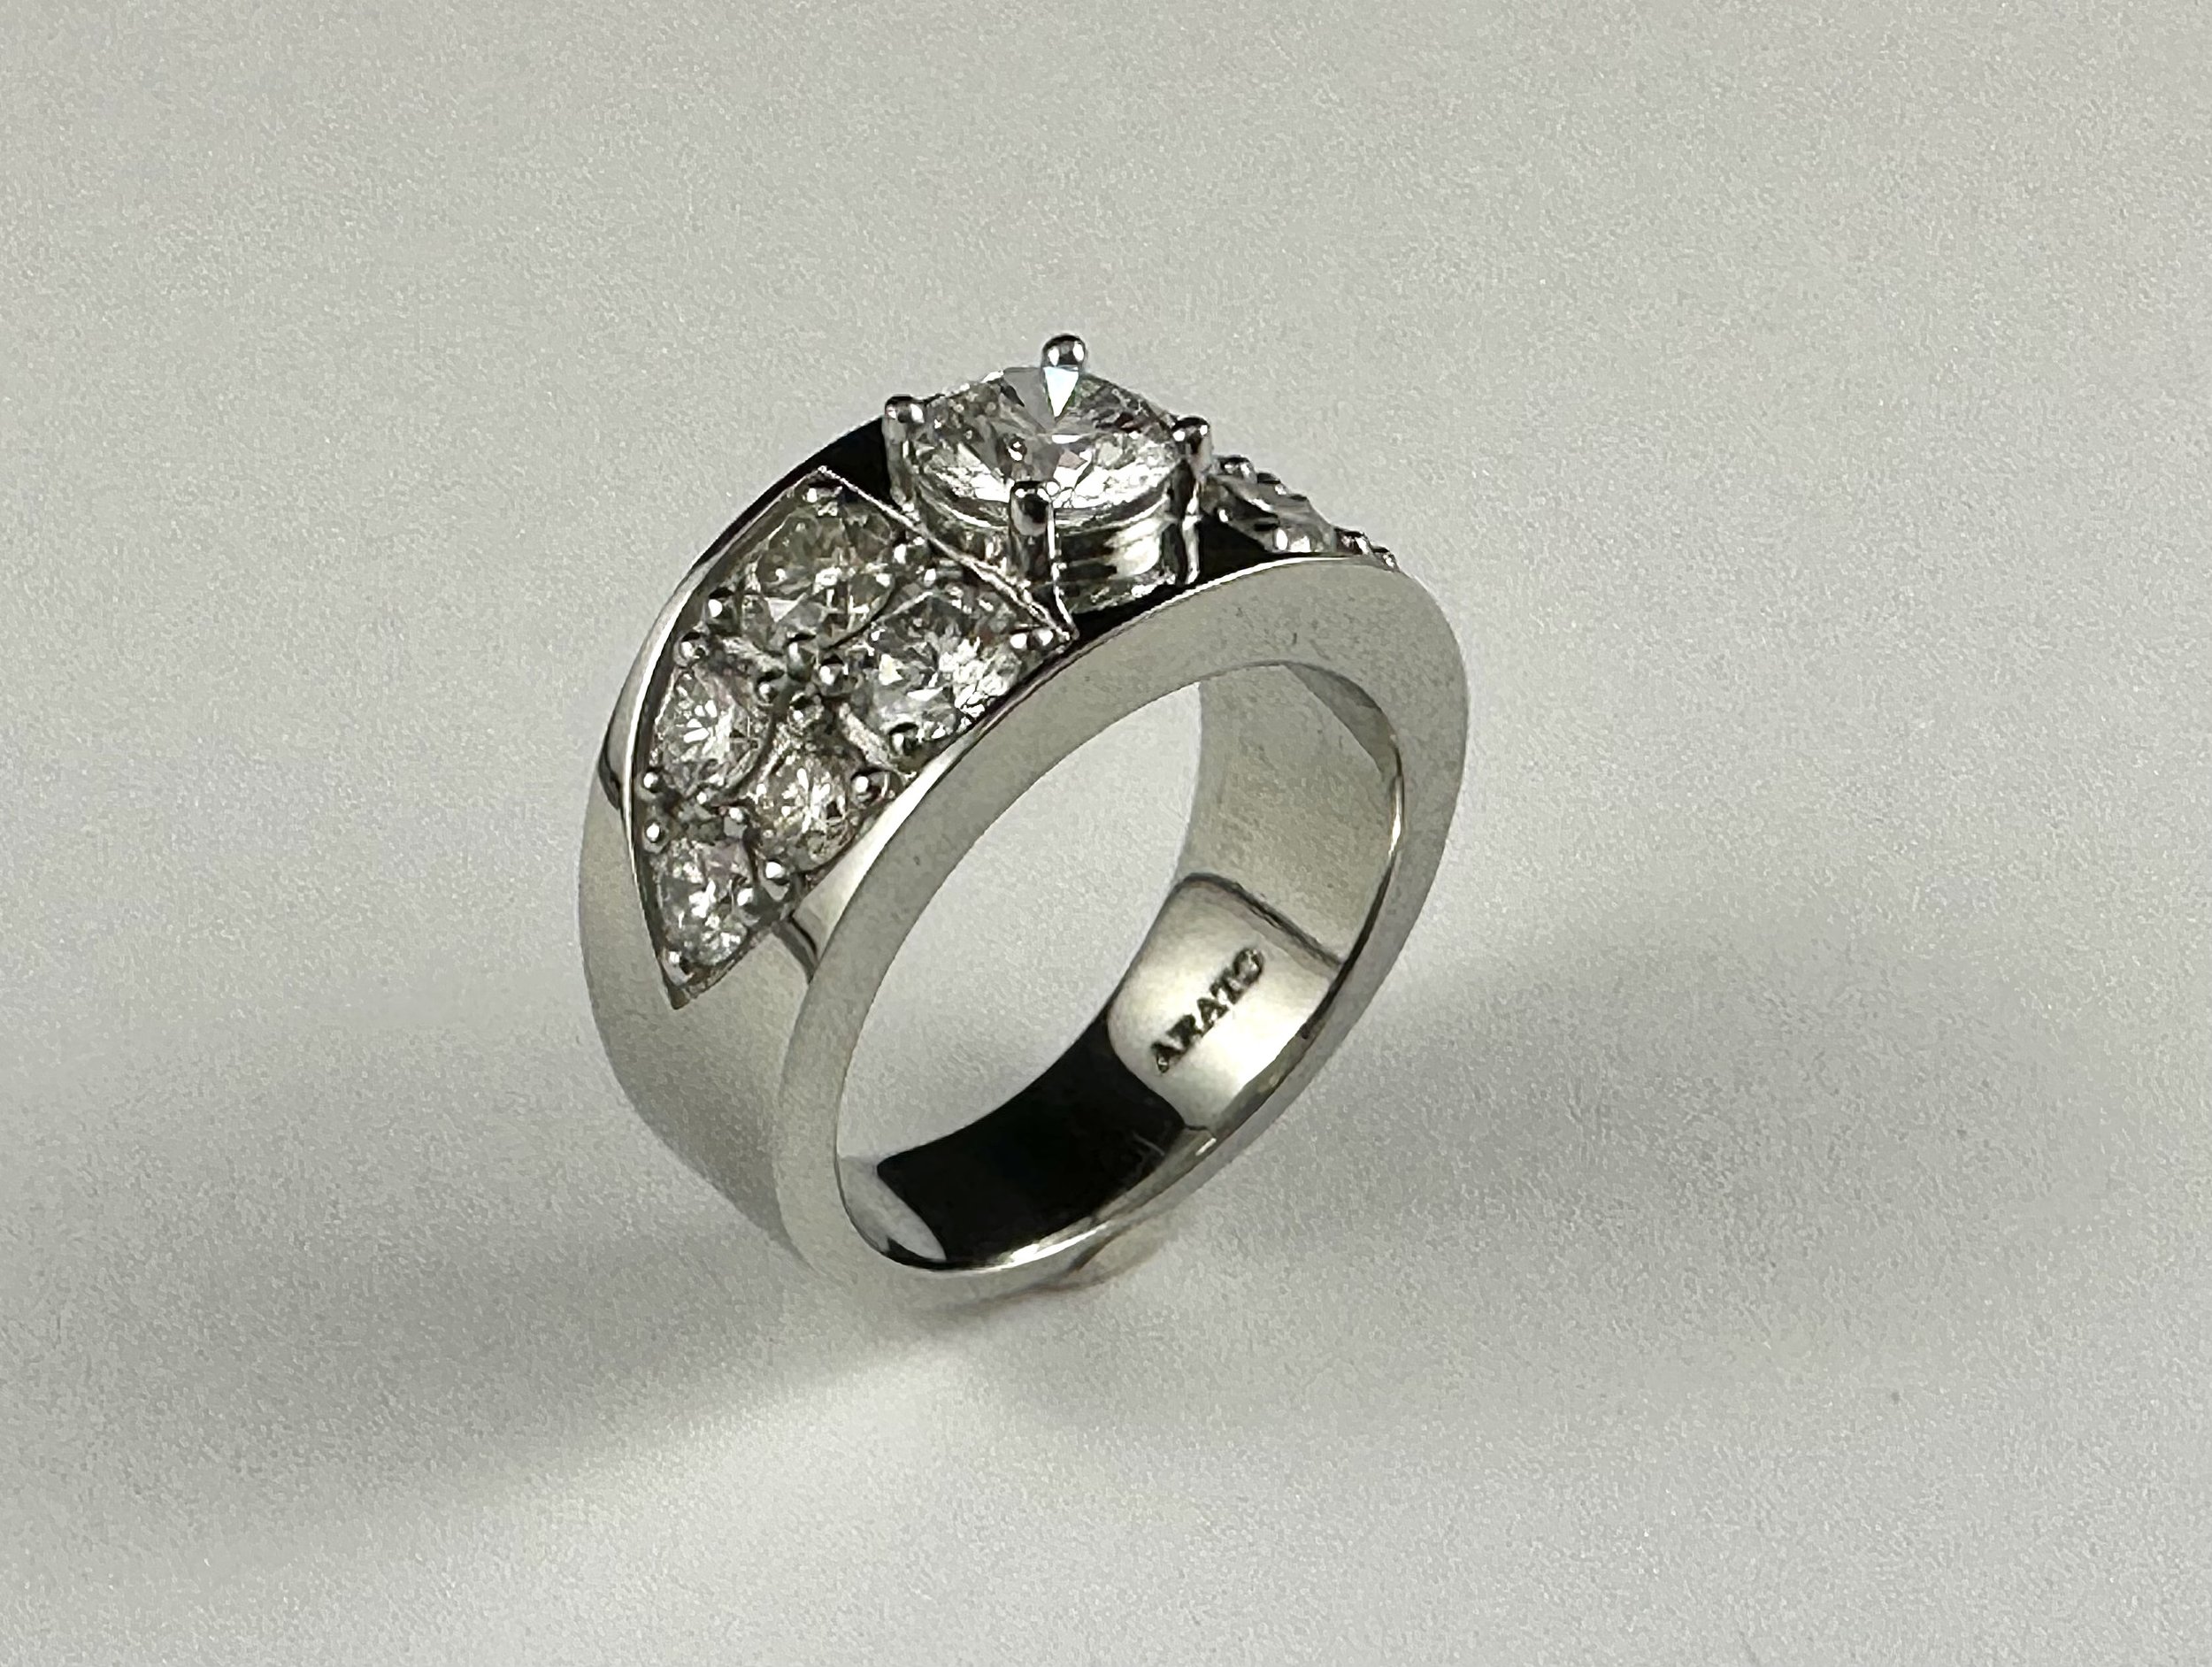 19K White Gold Diamond Ring (Center Diamond with Graduated Pave Shoulders)